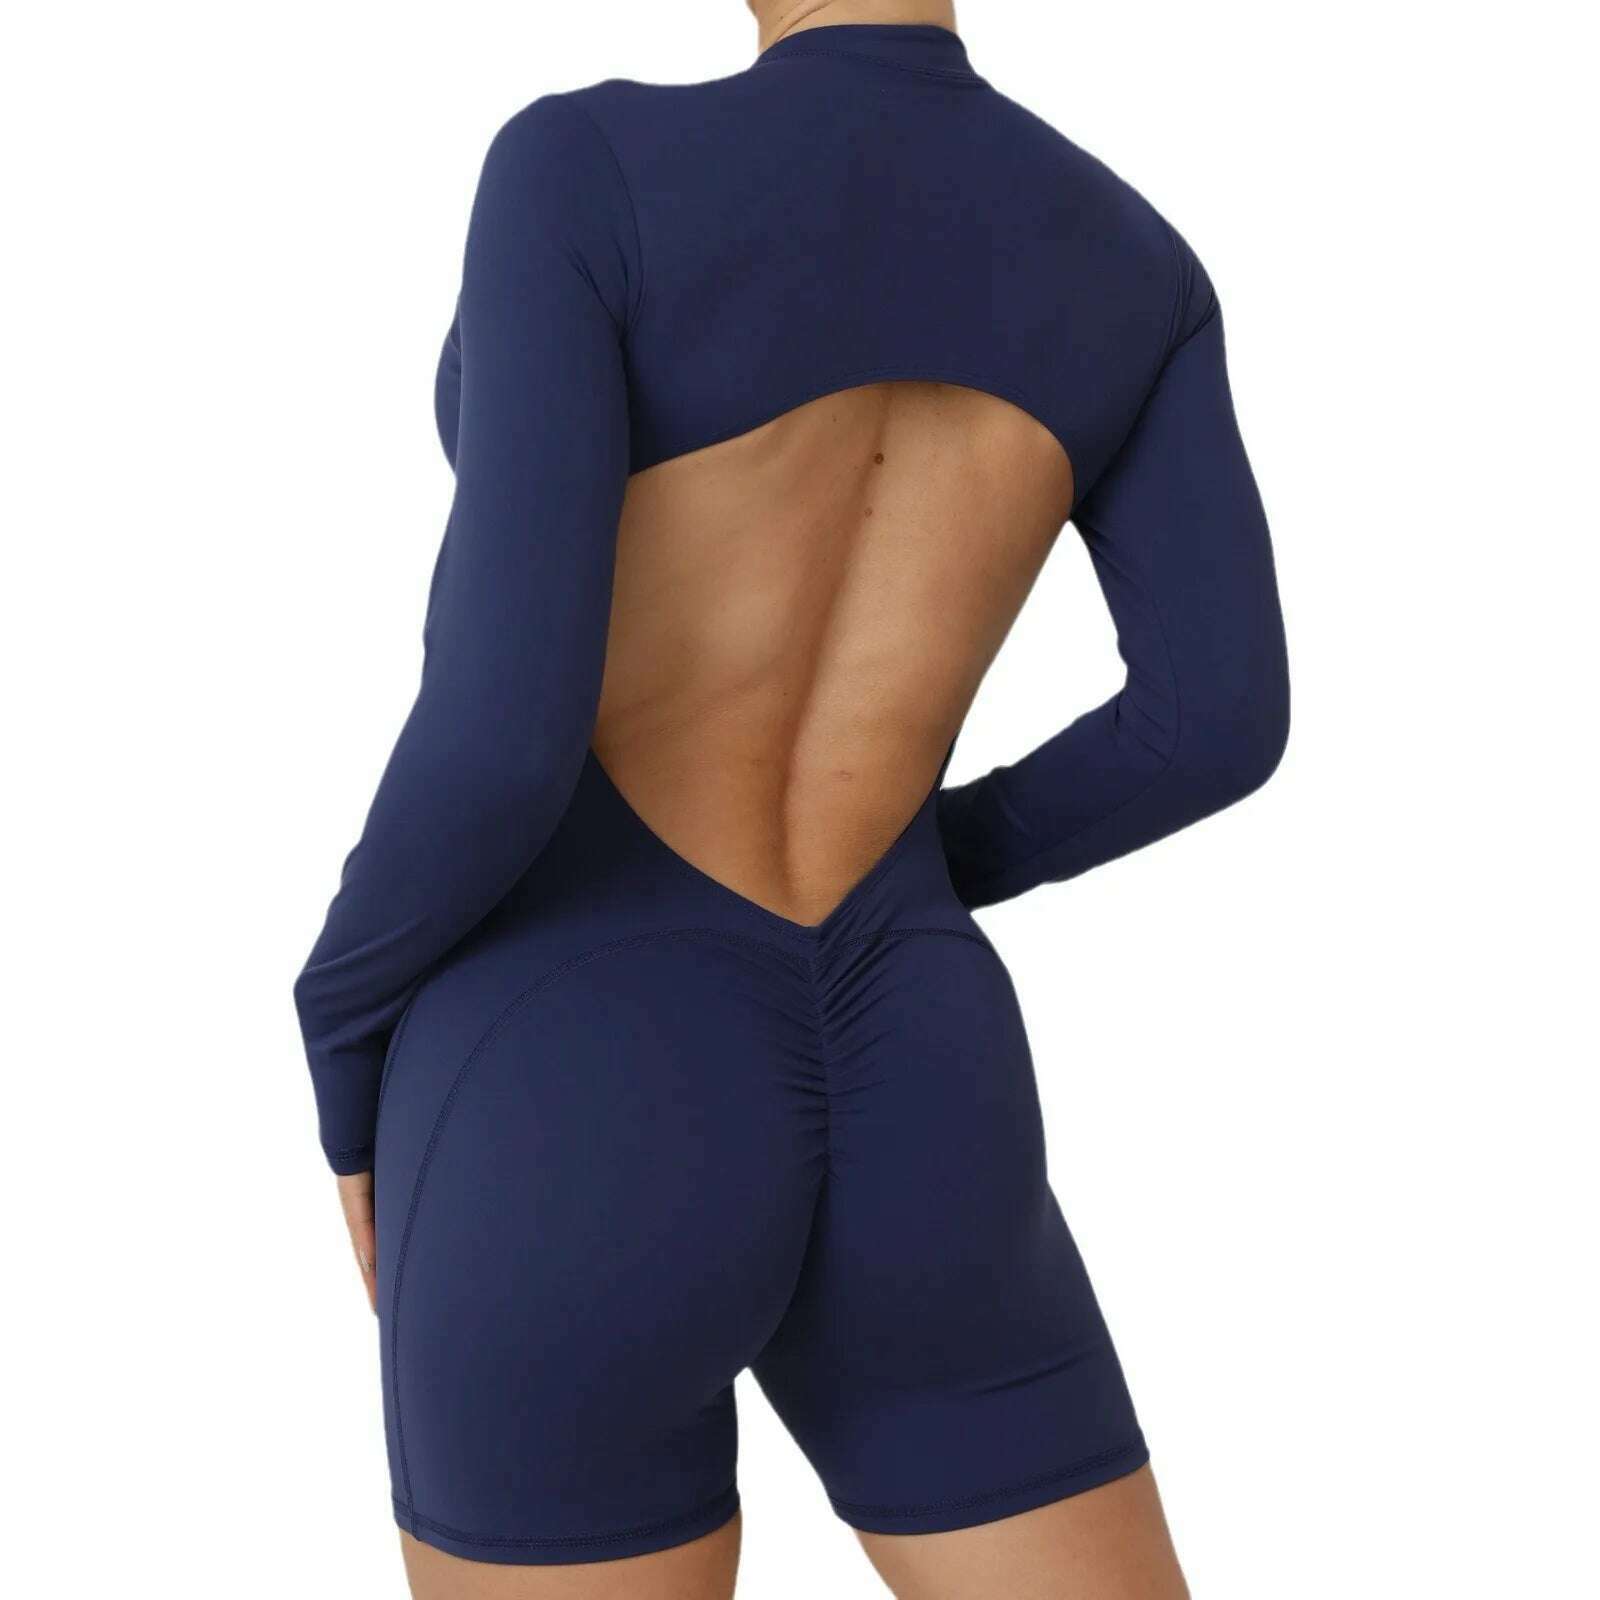 KIMLUD, Halter Bodysuits Long Sleeved Jumpsuit Women Sport One Pieces Shorts Set Sexy Fitness Overalls Yoga Workout Sportswear Woman Gym, KIMLUD Womens Clothes